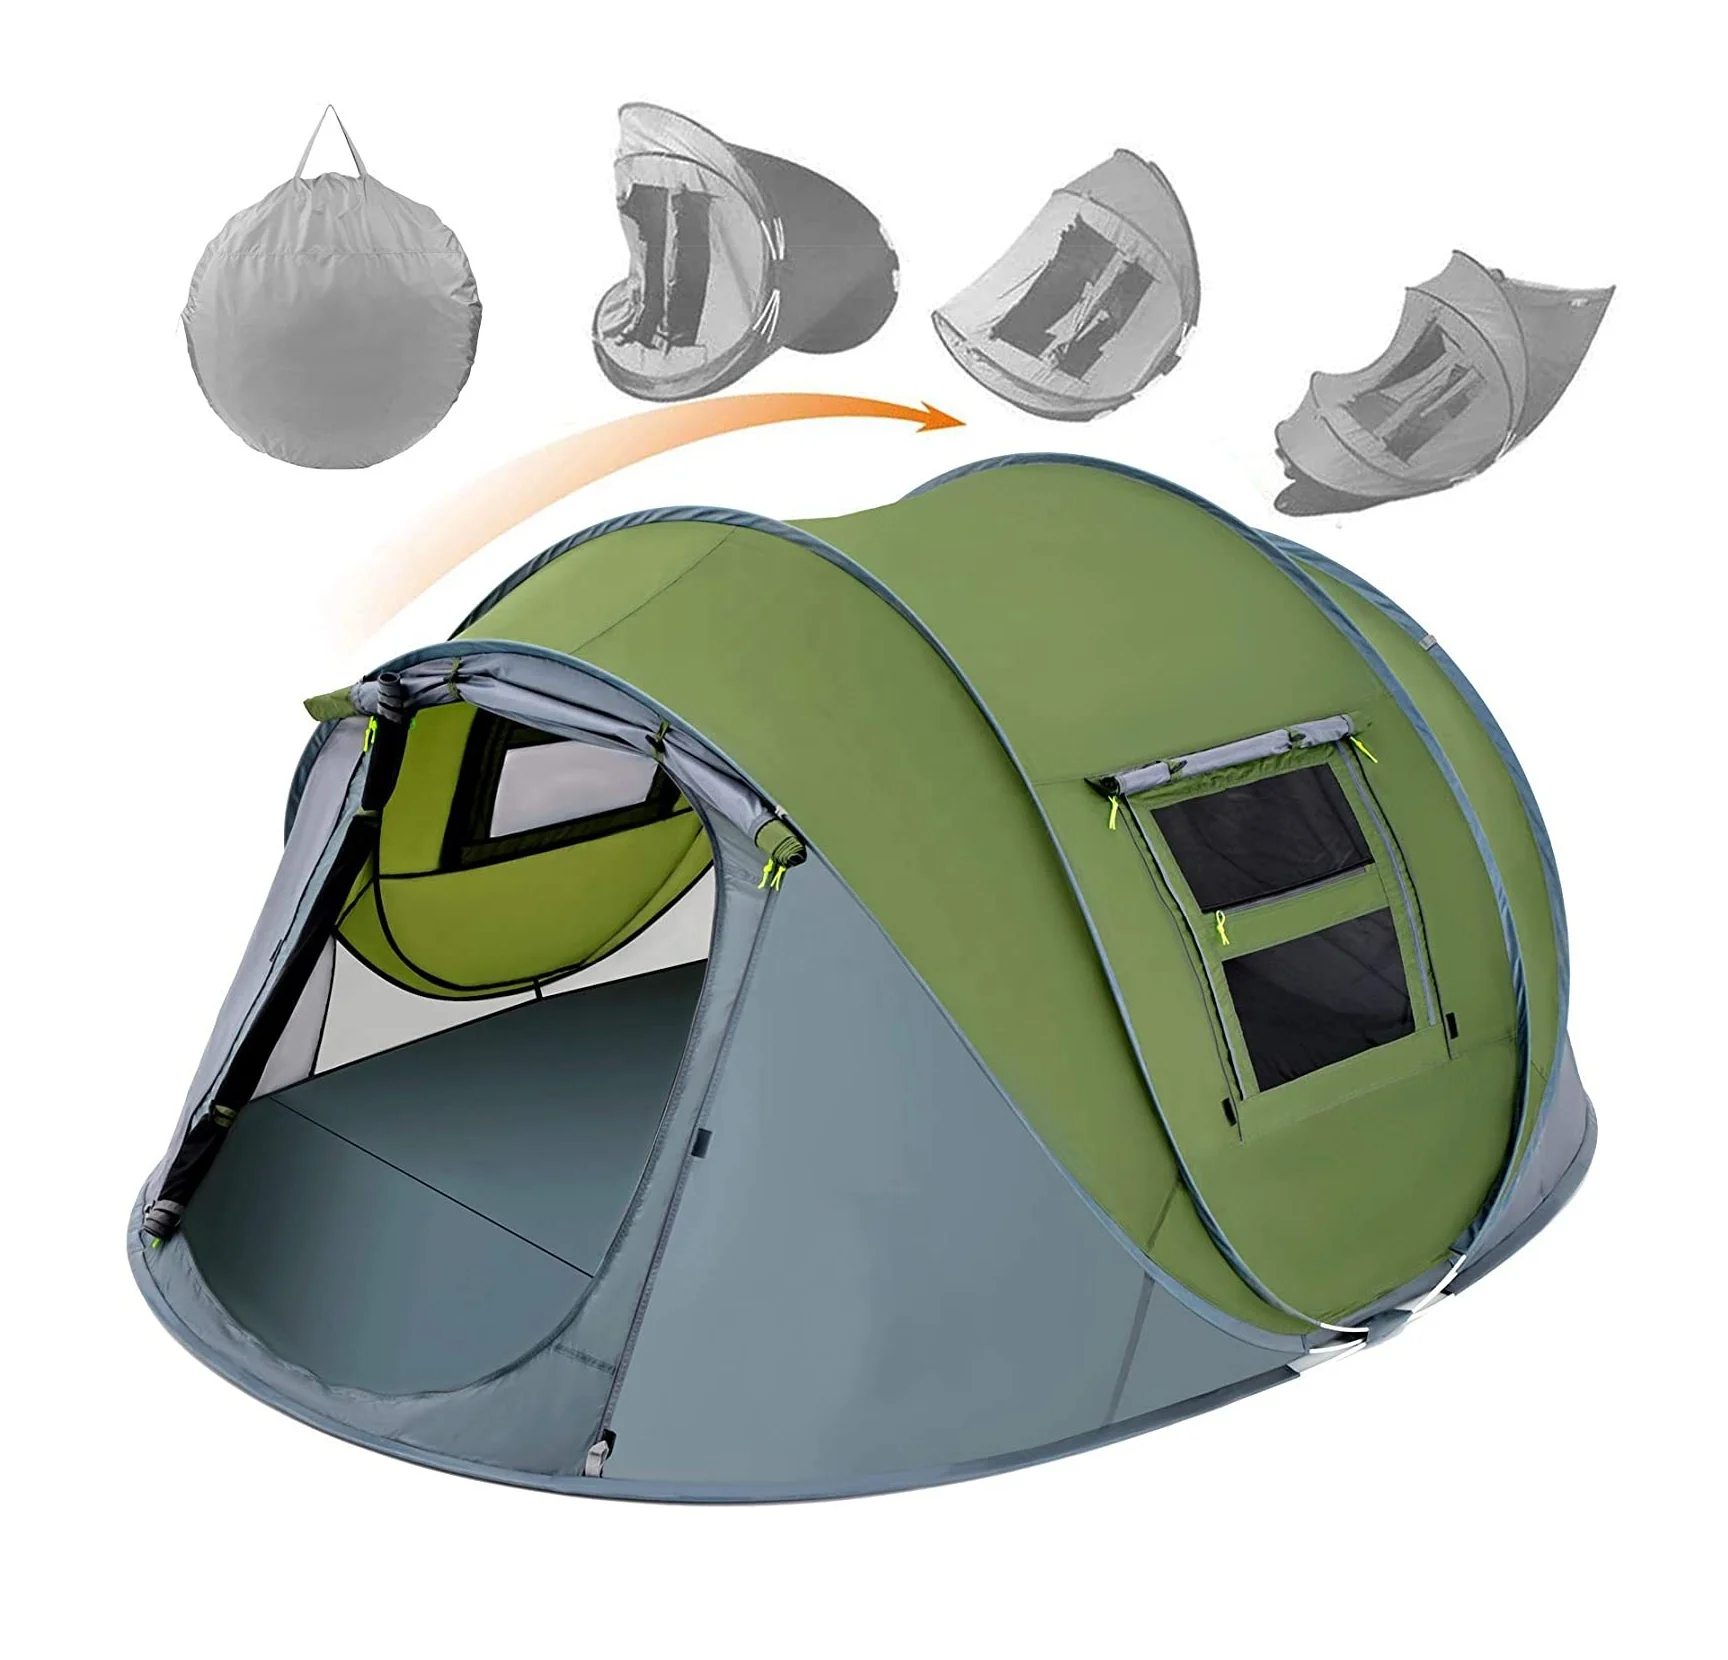 

YOUSKY 4 Person Easy Pop Up Tent Waterproof Automatic Setup 2 Doors-Instant Family Tents for Camping Hiking & Traveling